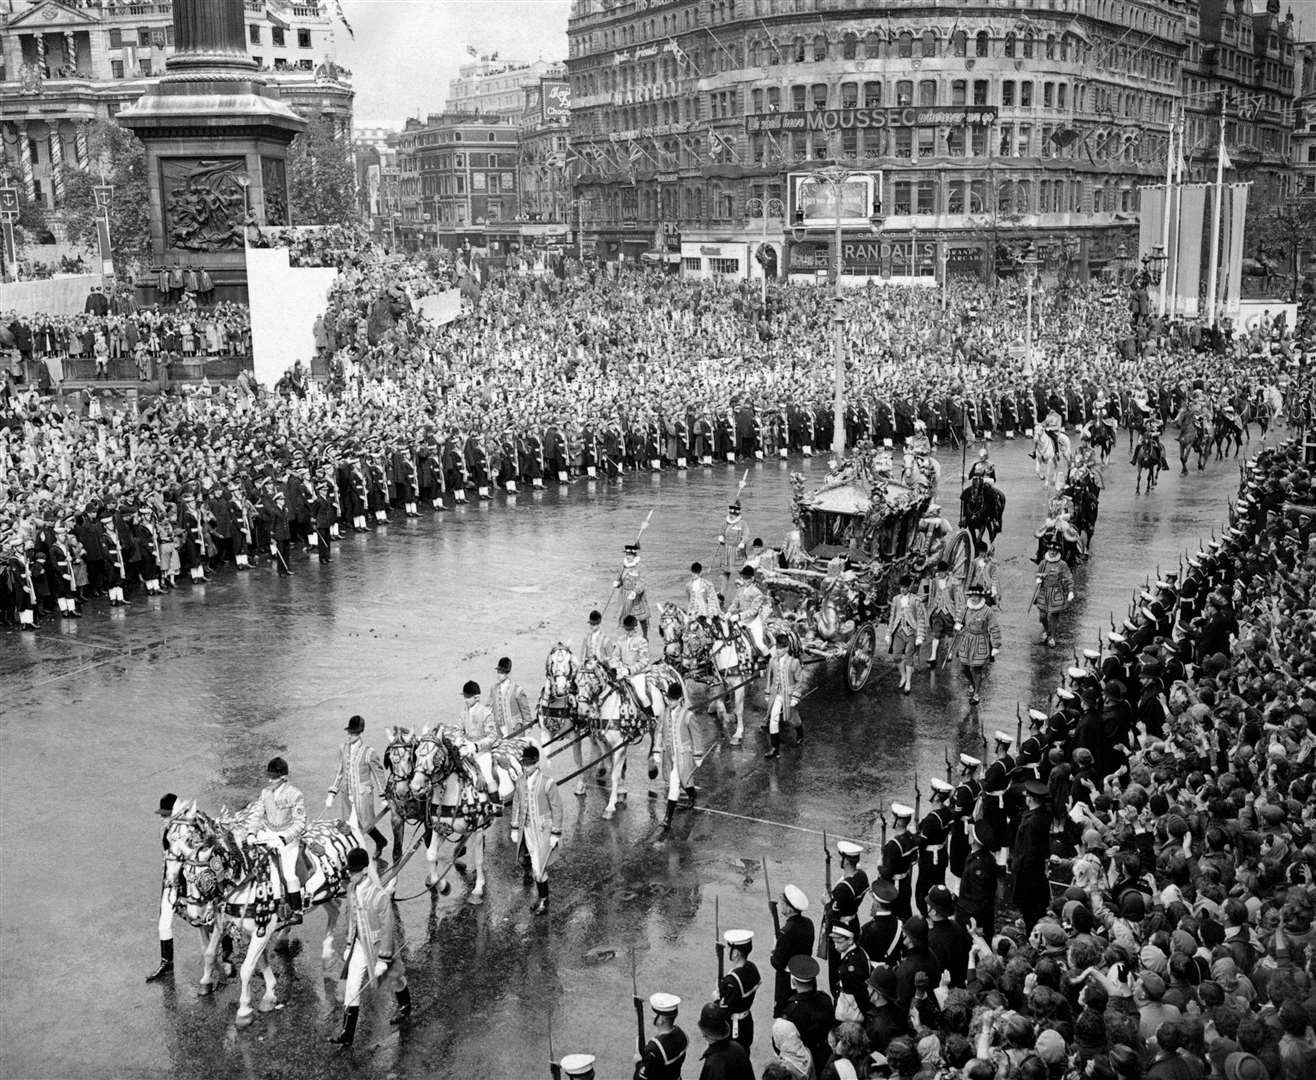 The Gold State Coach, bearing the Queen and the Duke of Edinburgh, passing through the cheering crowds which, despite the rain, packed Trafalgar Square to greet the sovereign on her way from Westminster Abbey to Buckingham Palace after her coronation (PA)